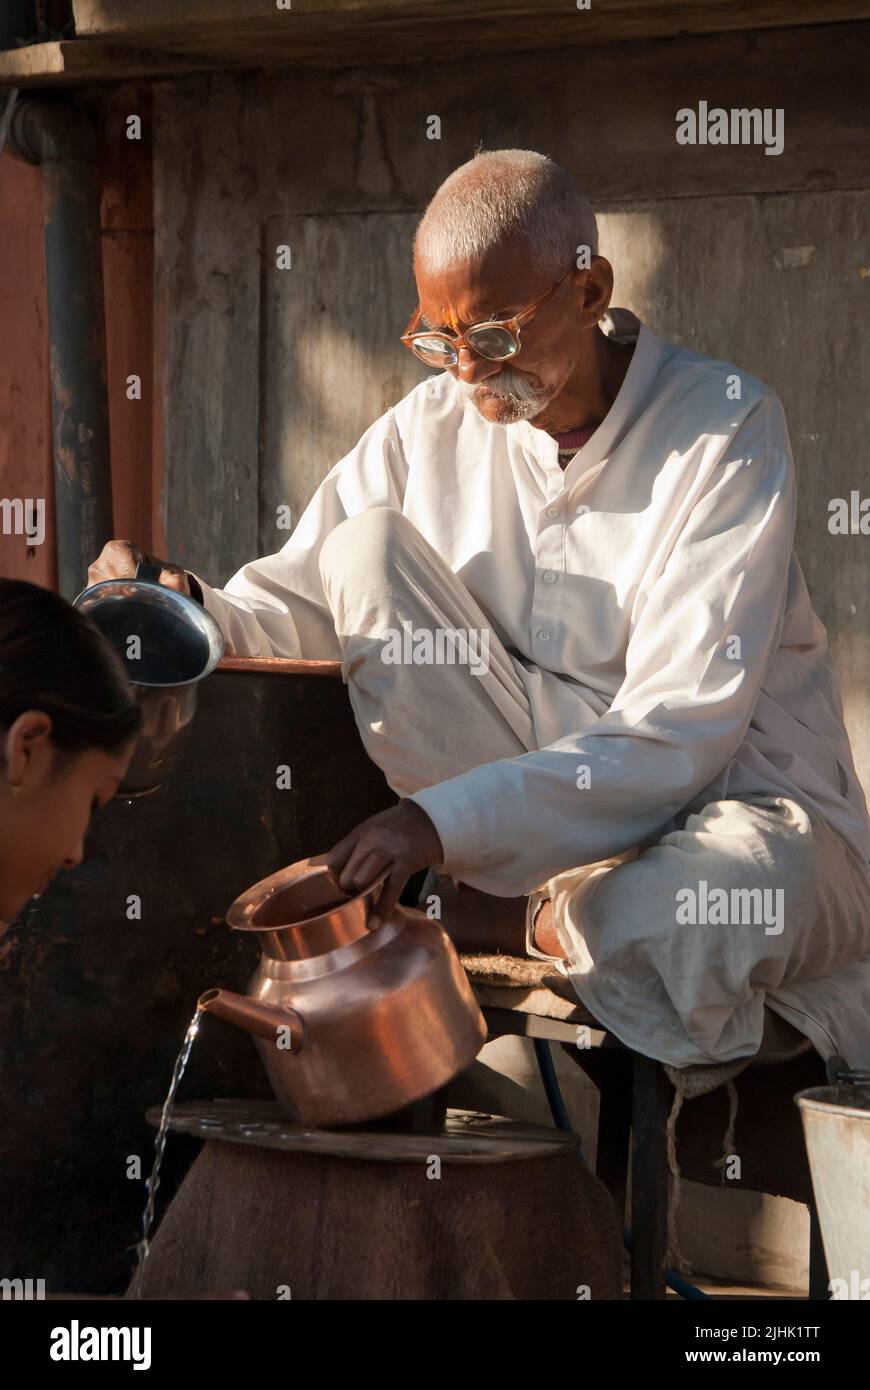 Fresh water sale in the street, India Stock Photo